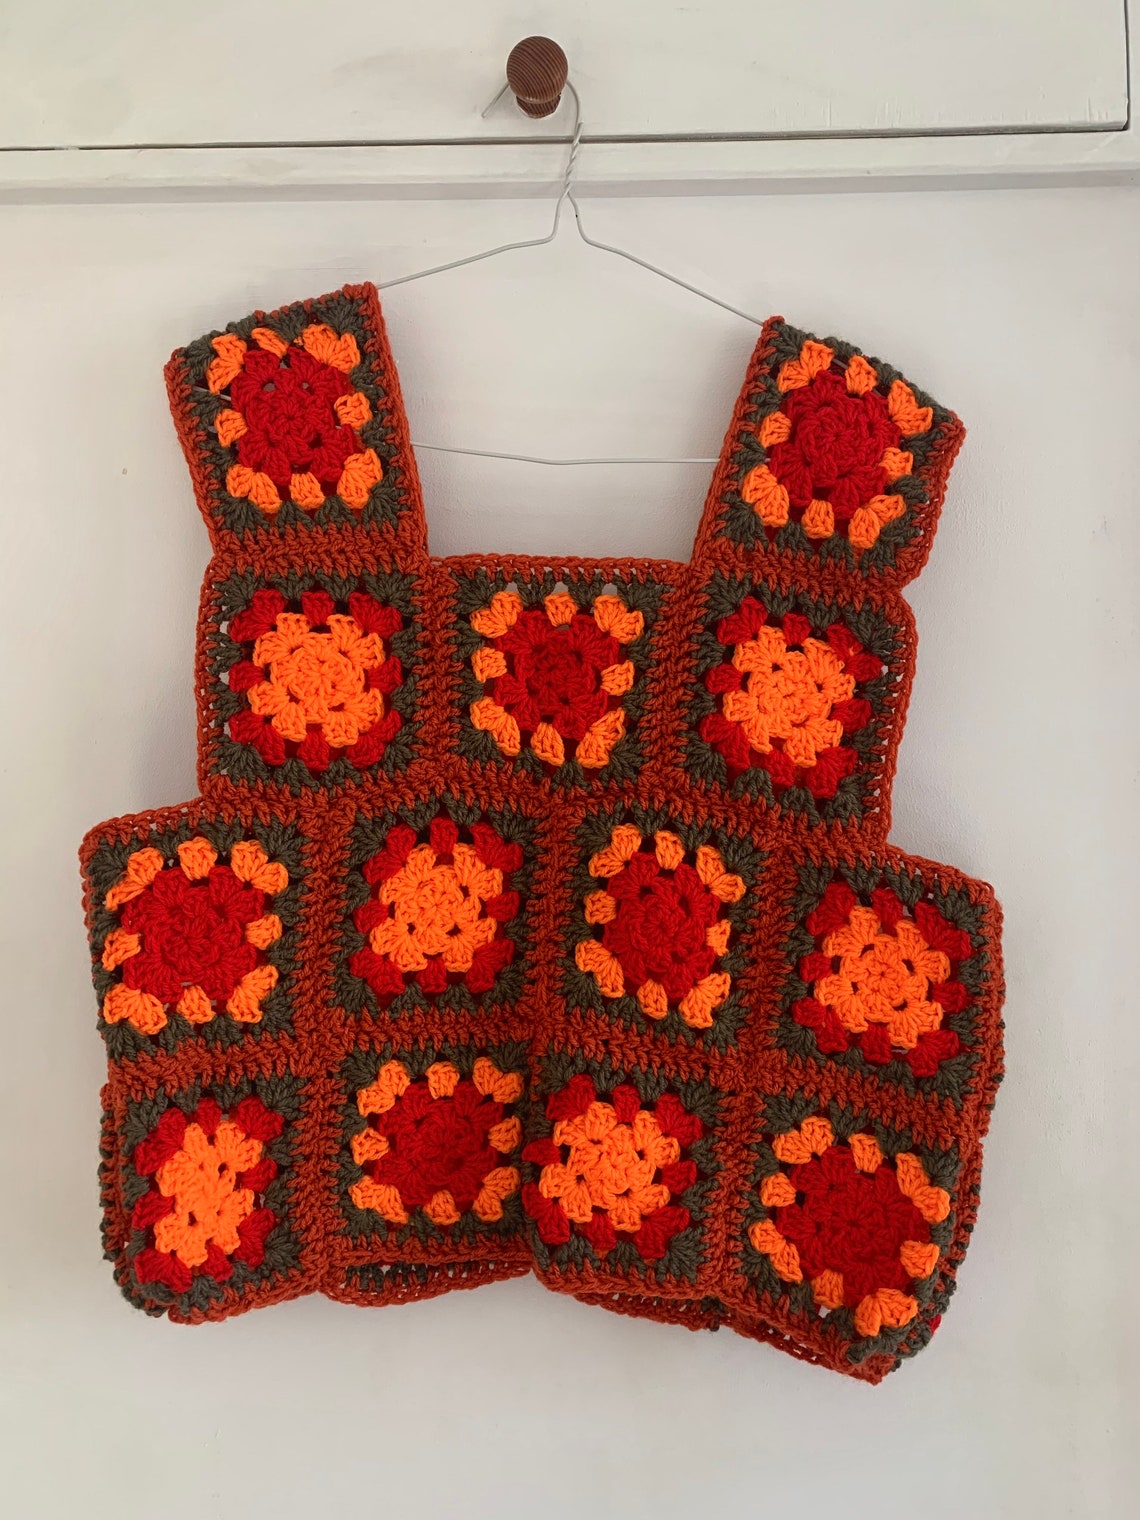 Patched crochet sweater sweater vest image 1